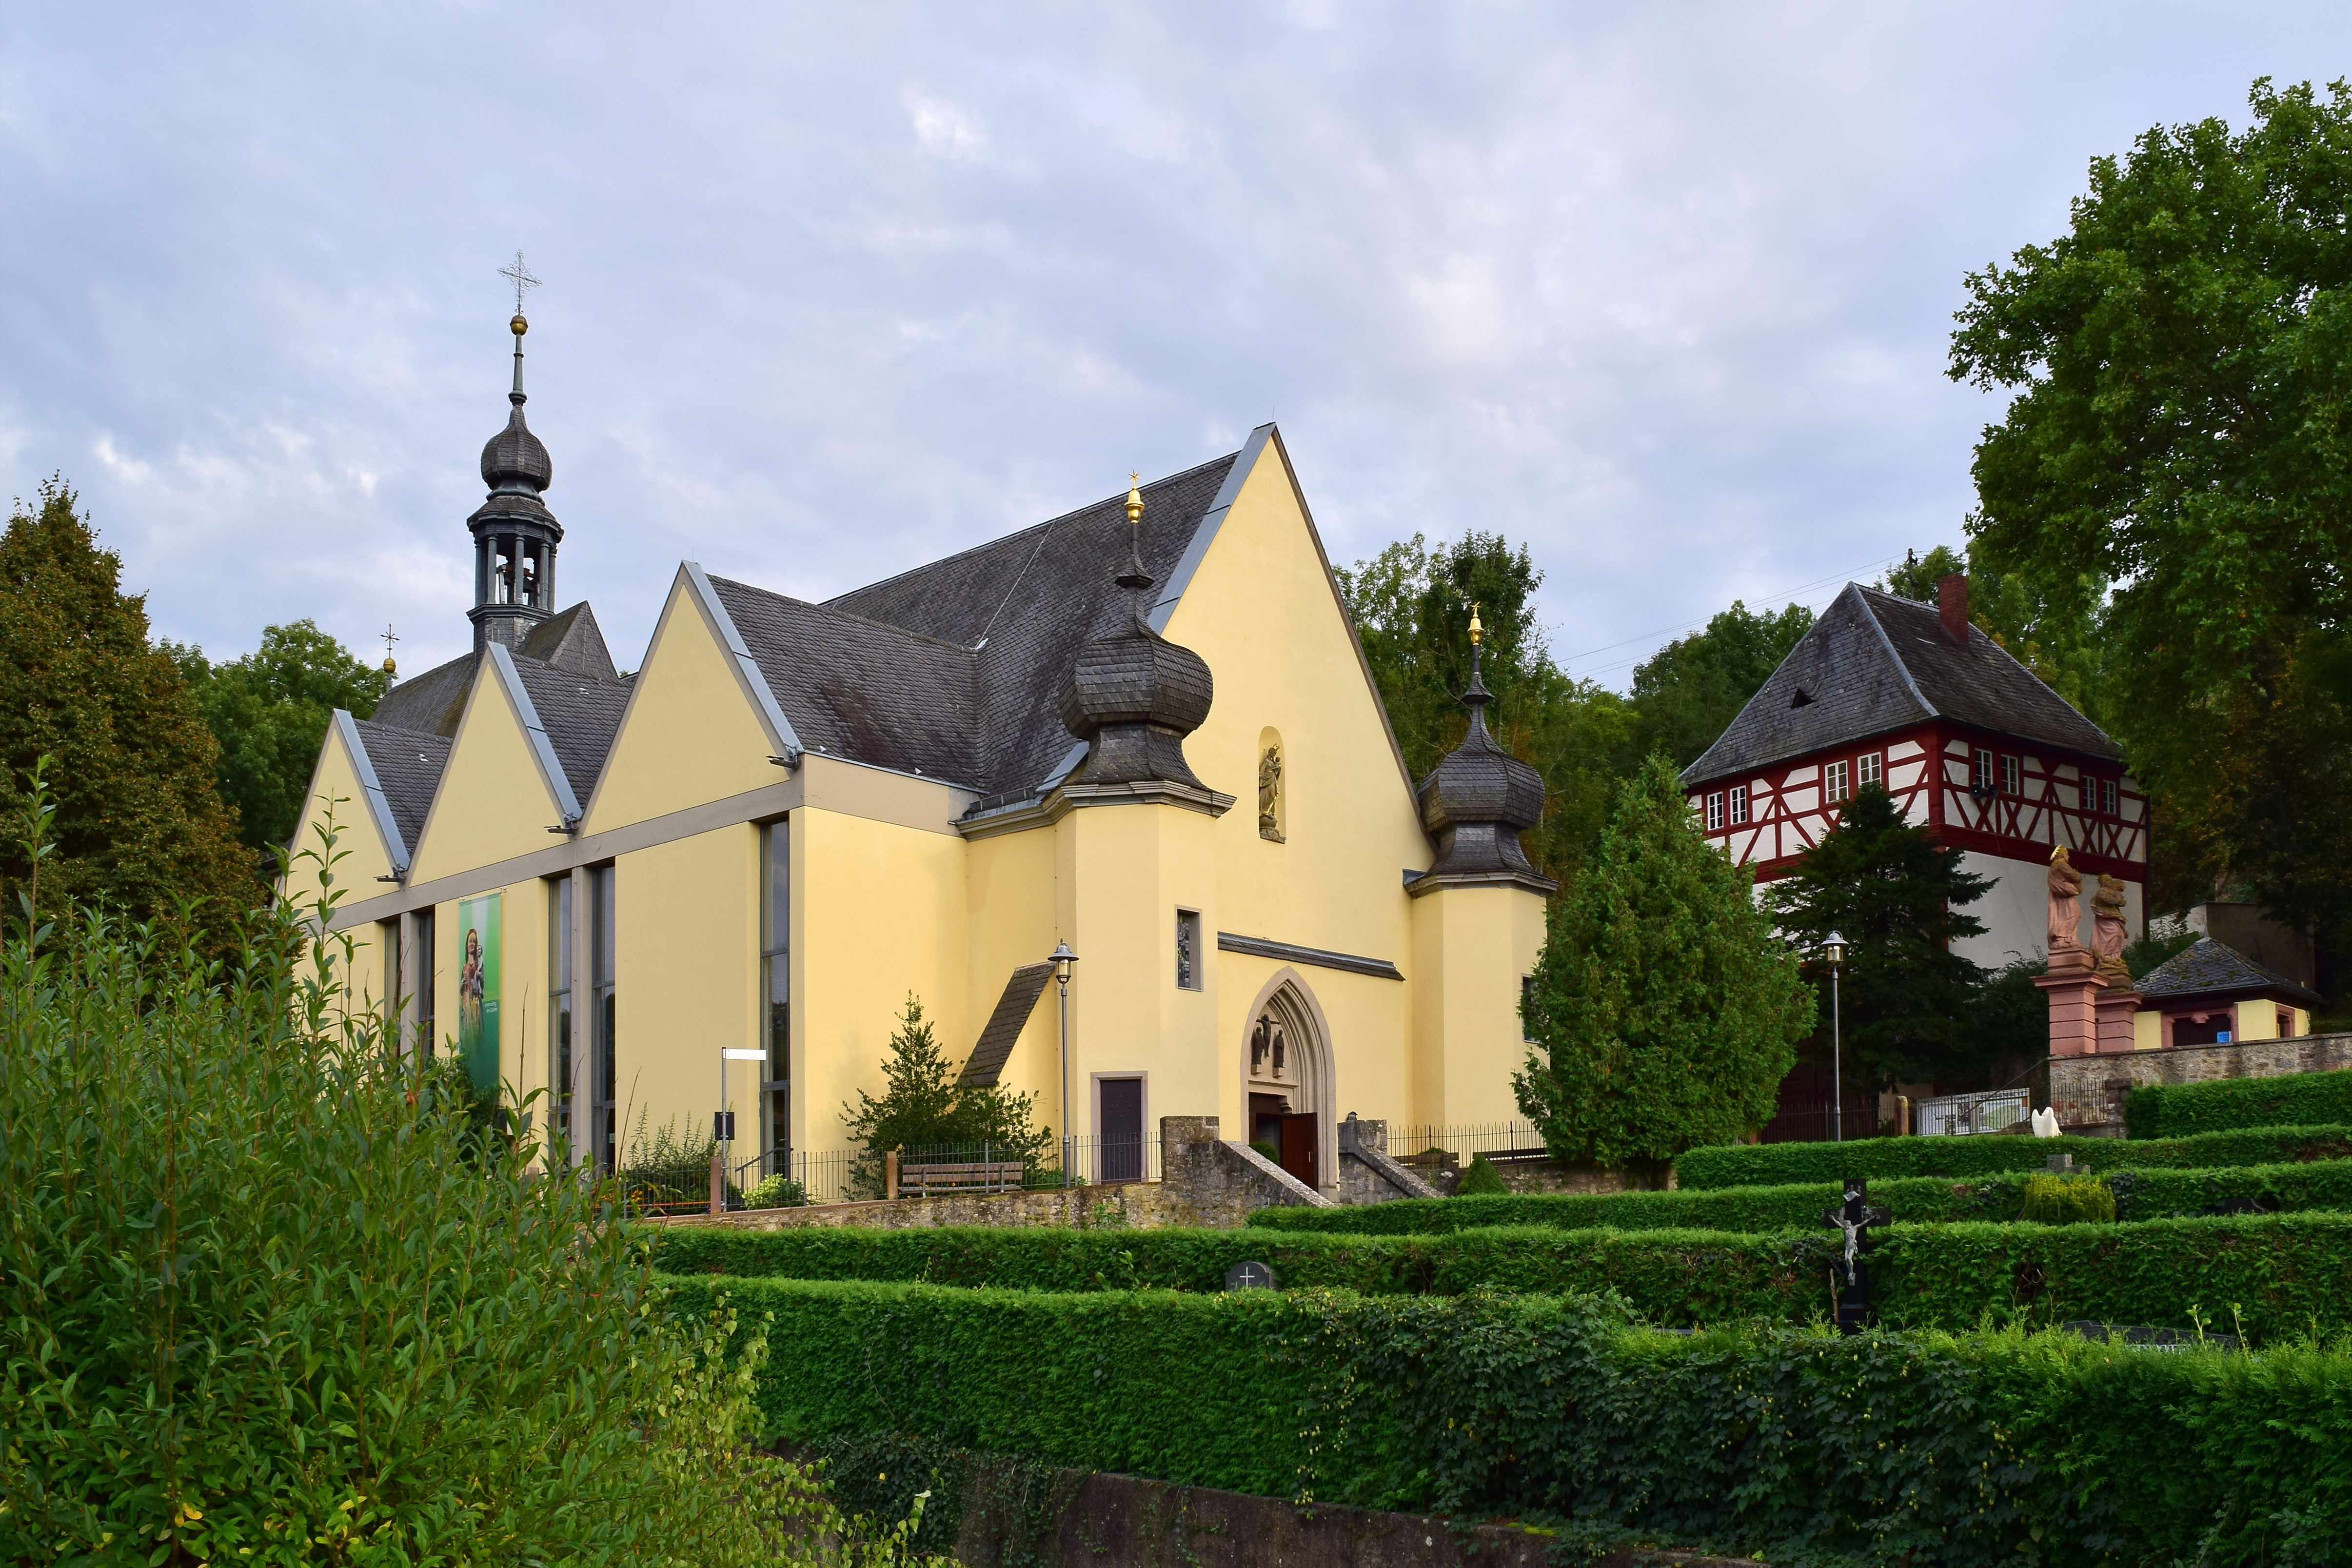 Photo of the church's exterior in the scenic landscape